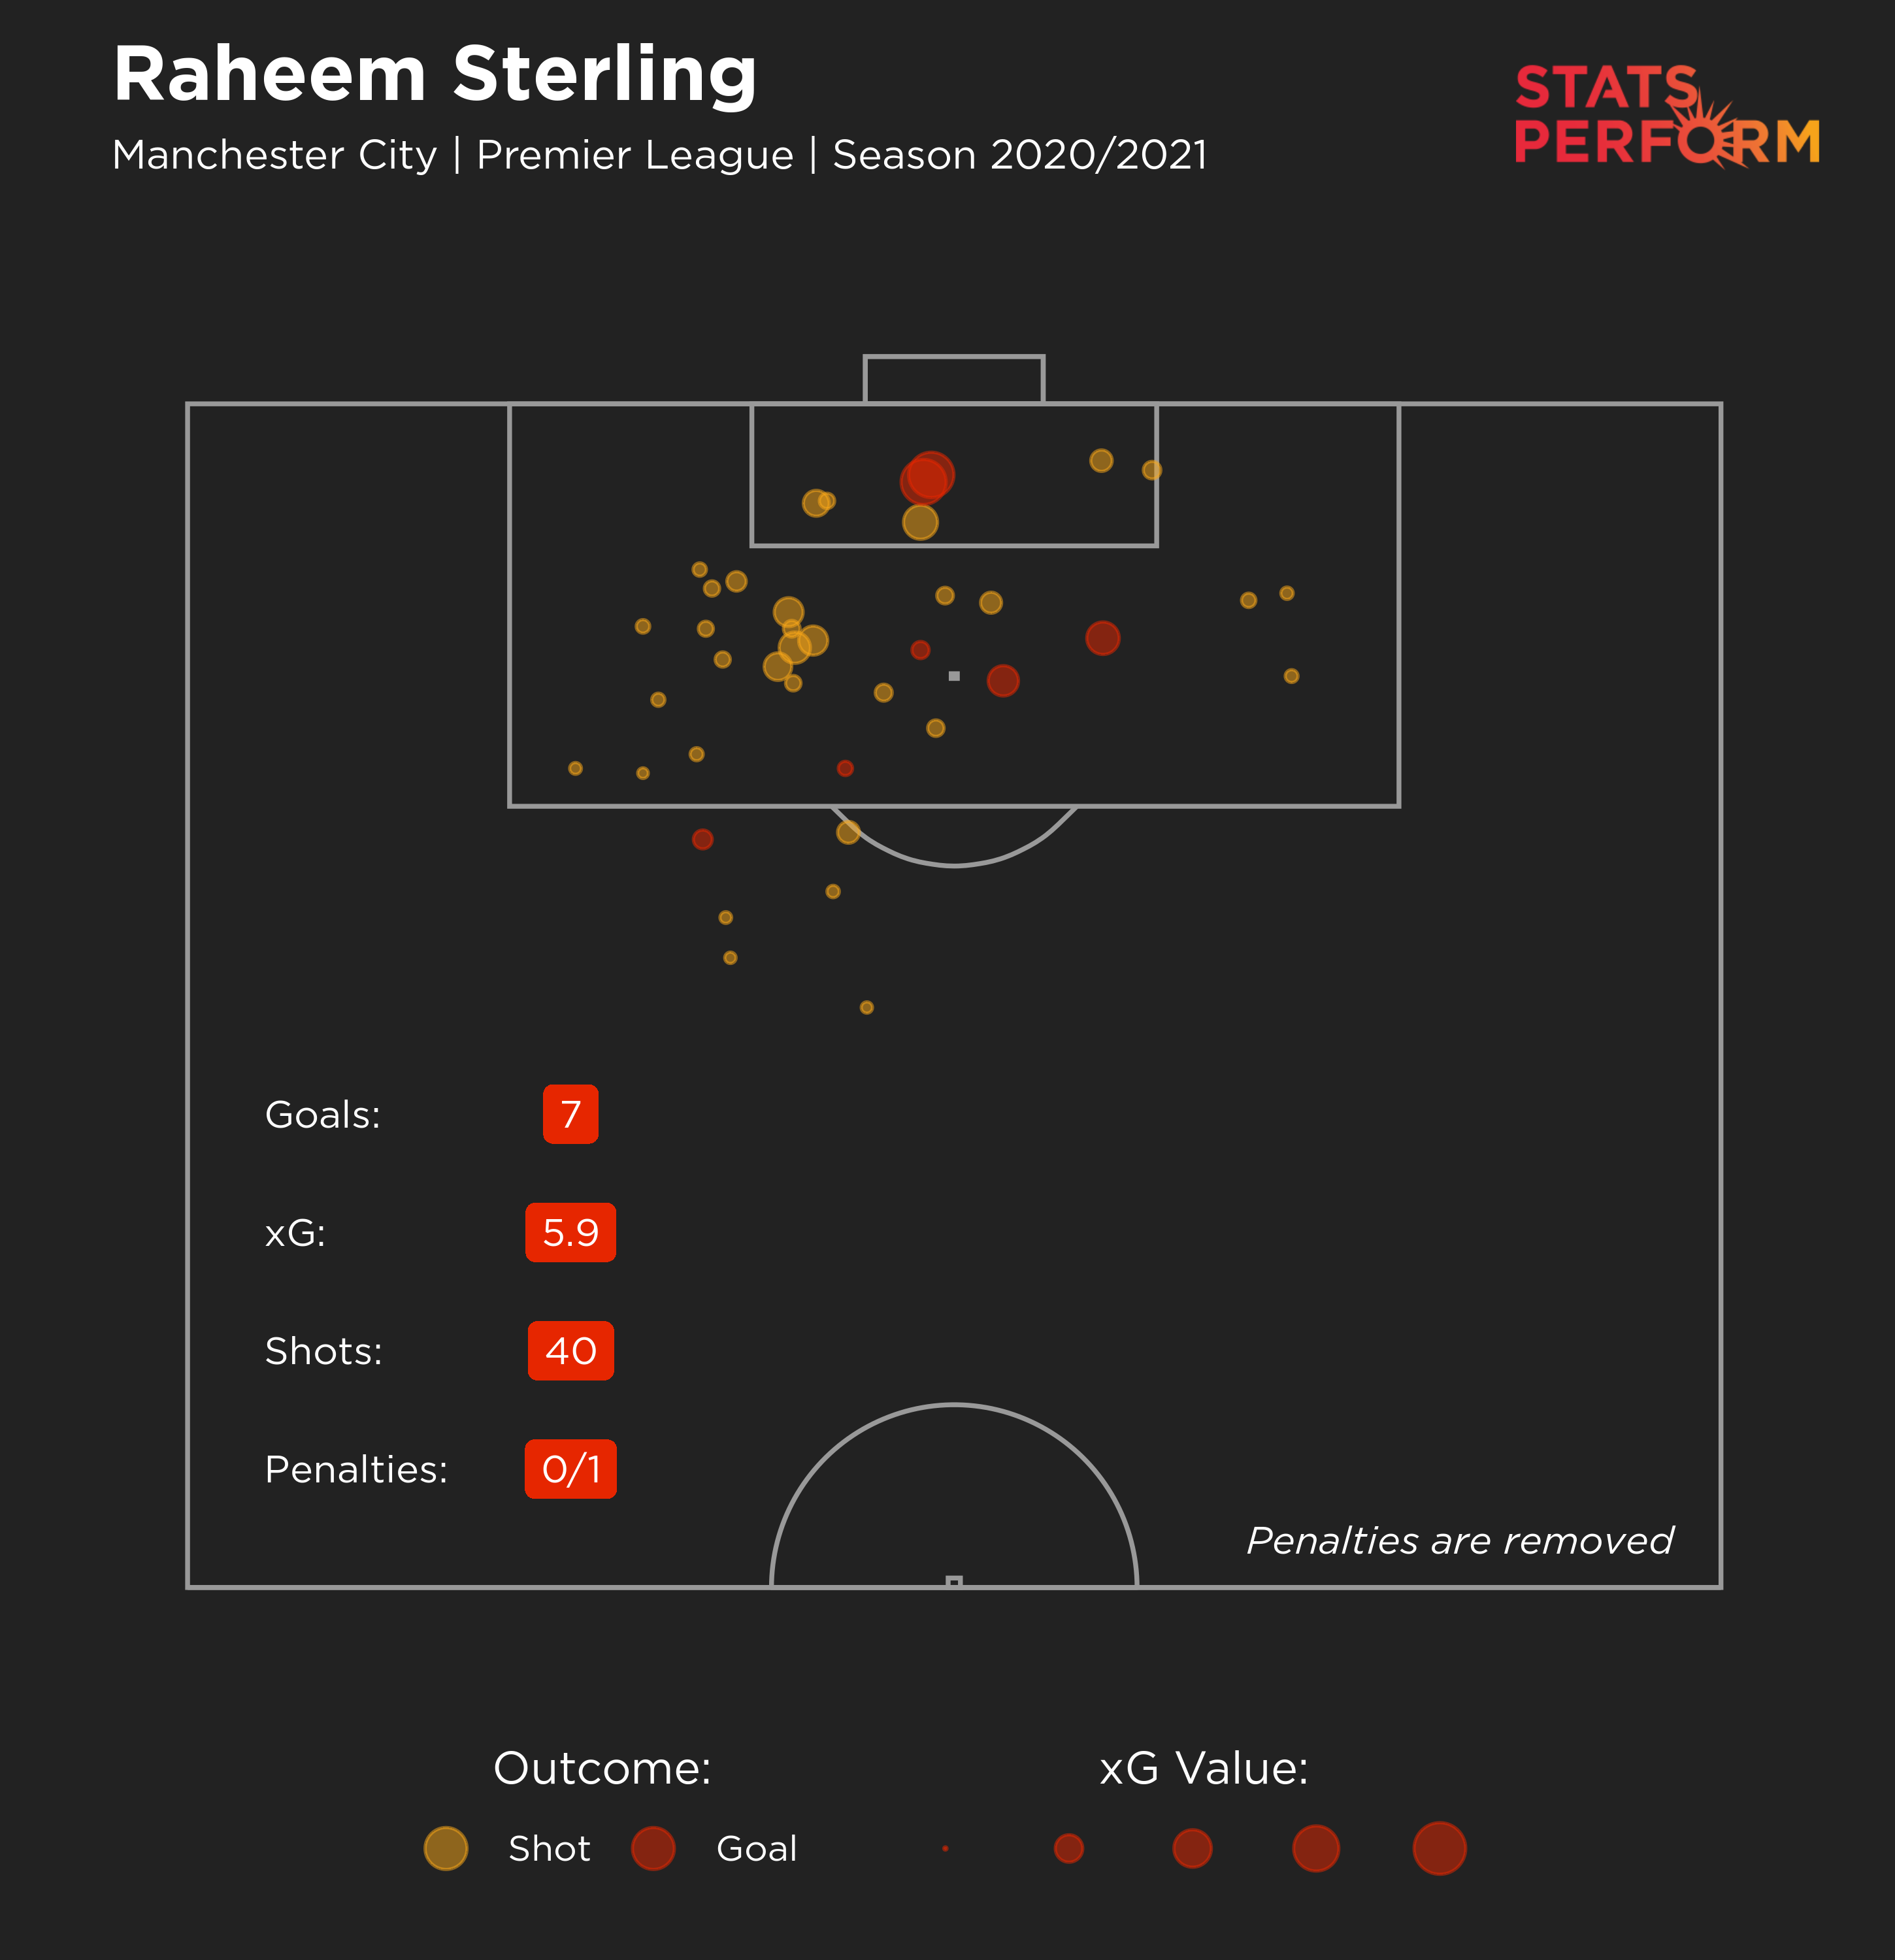 Raheem Sterling is out-performing his expected goals (xG) value in the Premier League this season